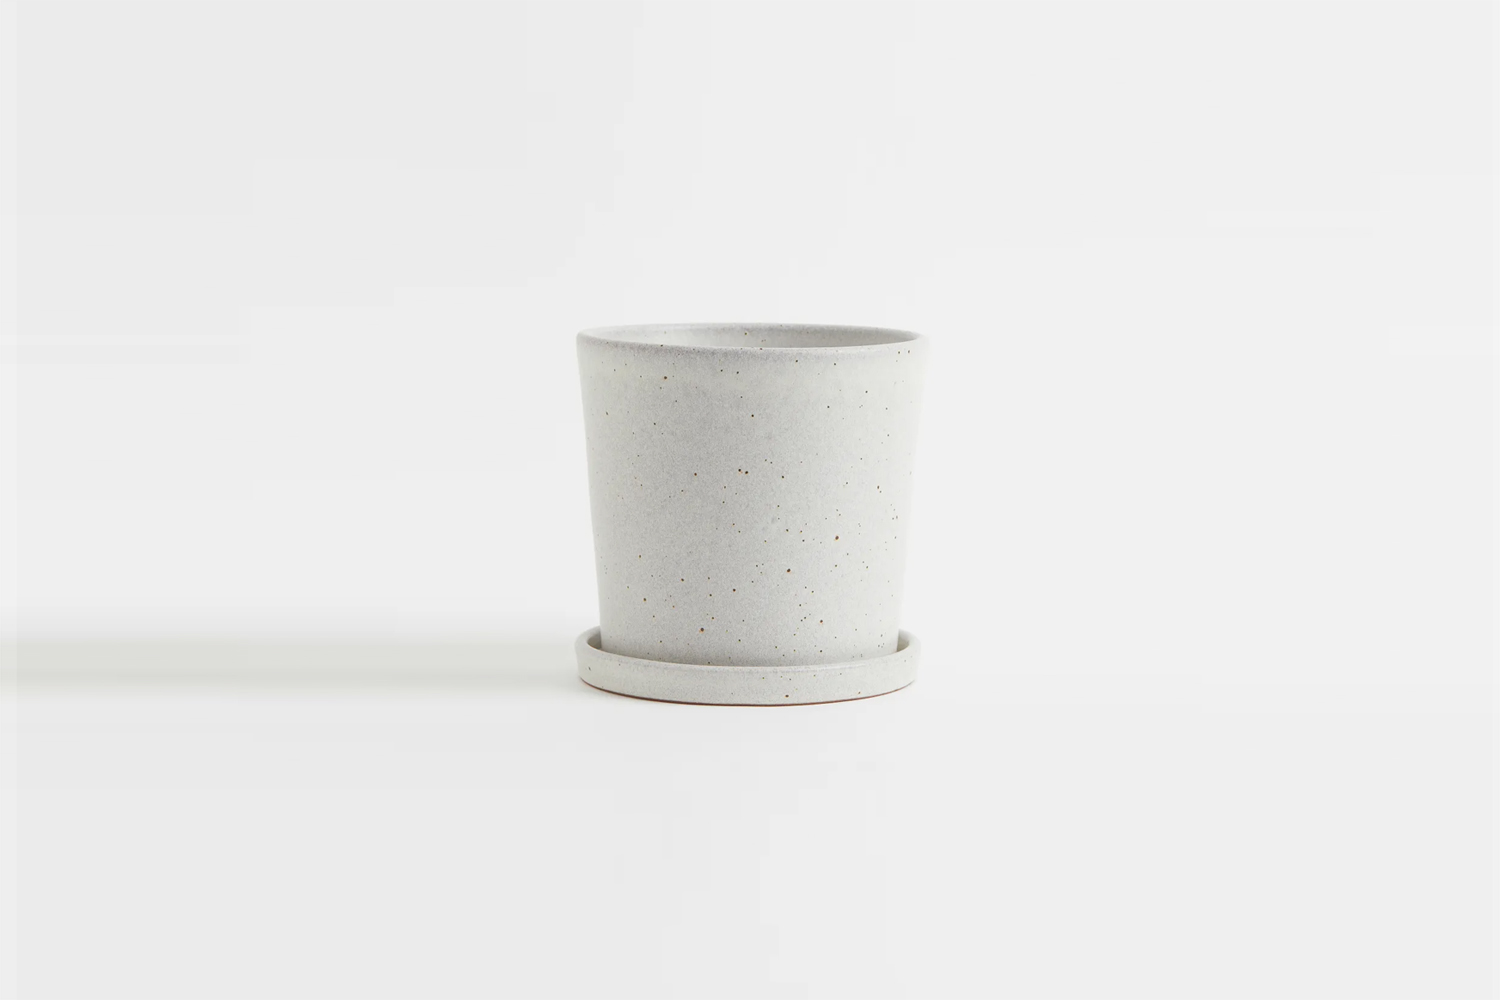 h&m plant pot and saucer white speckled 17